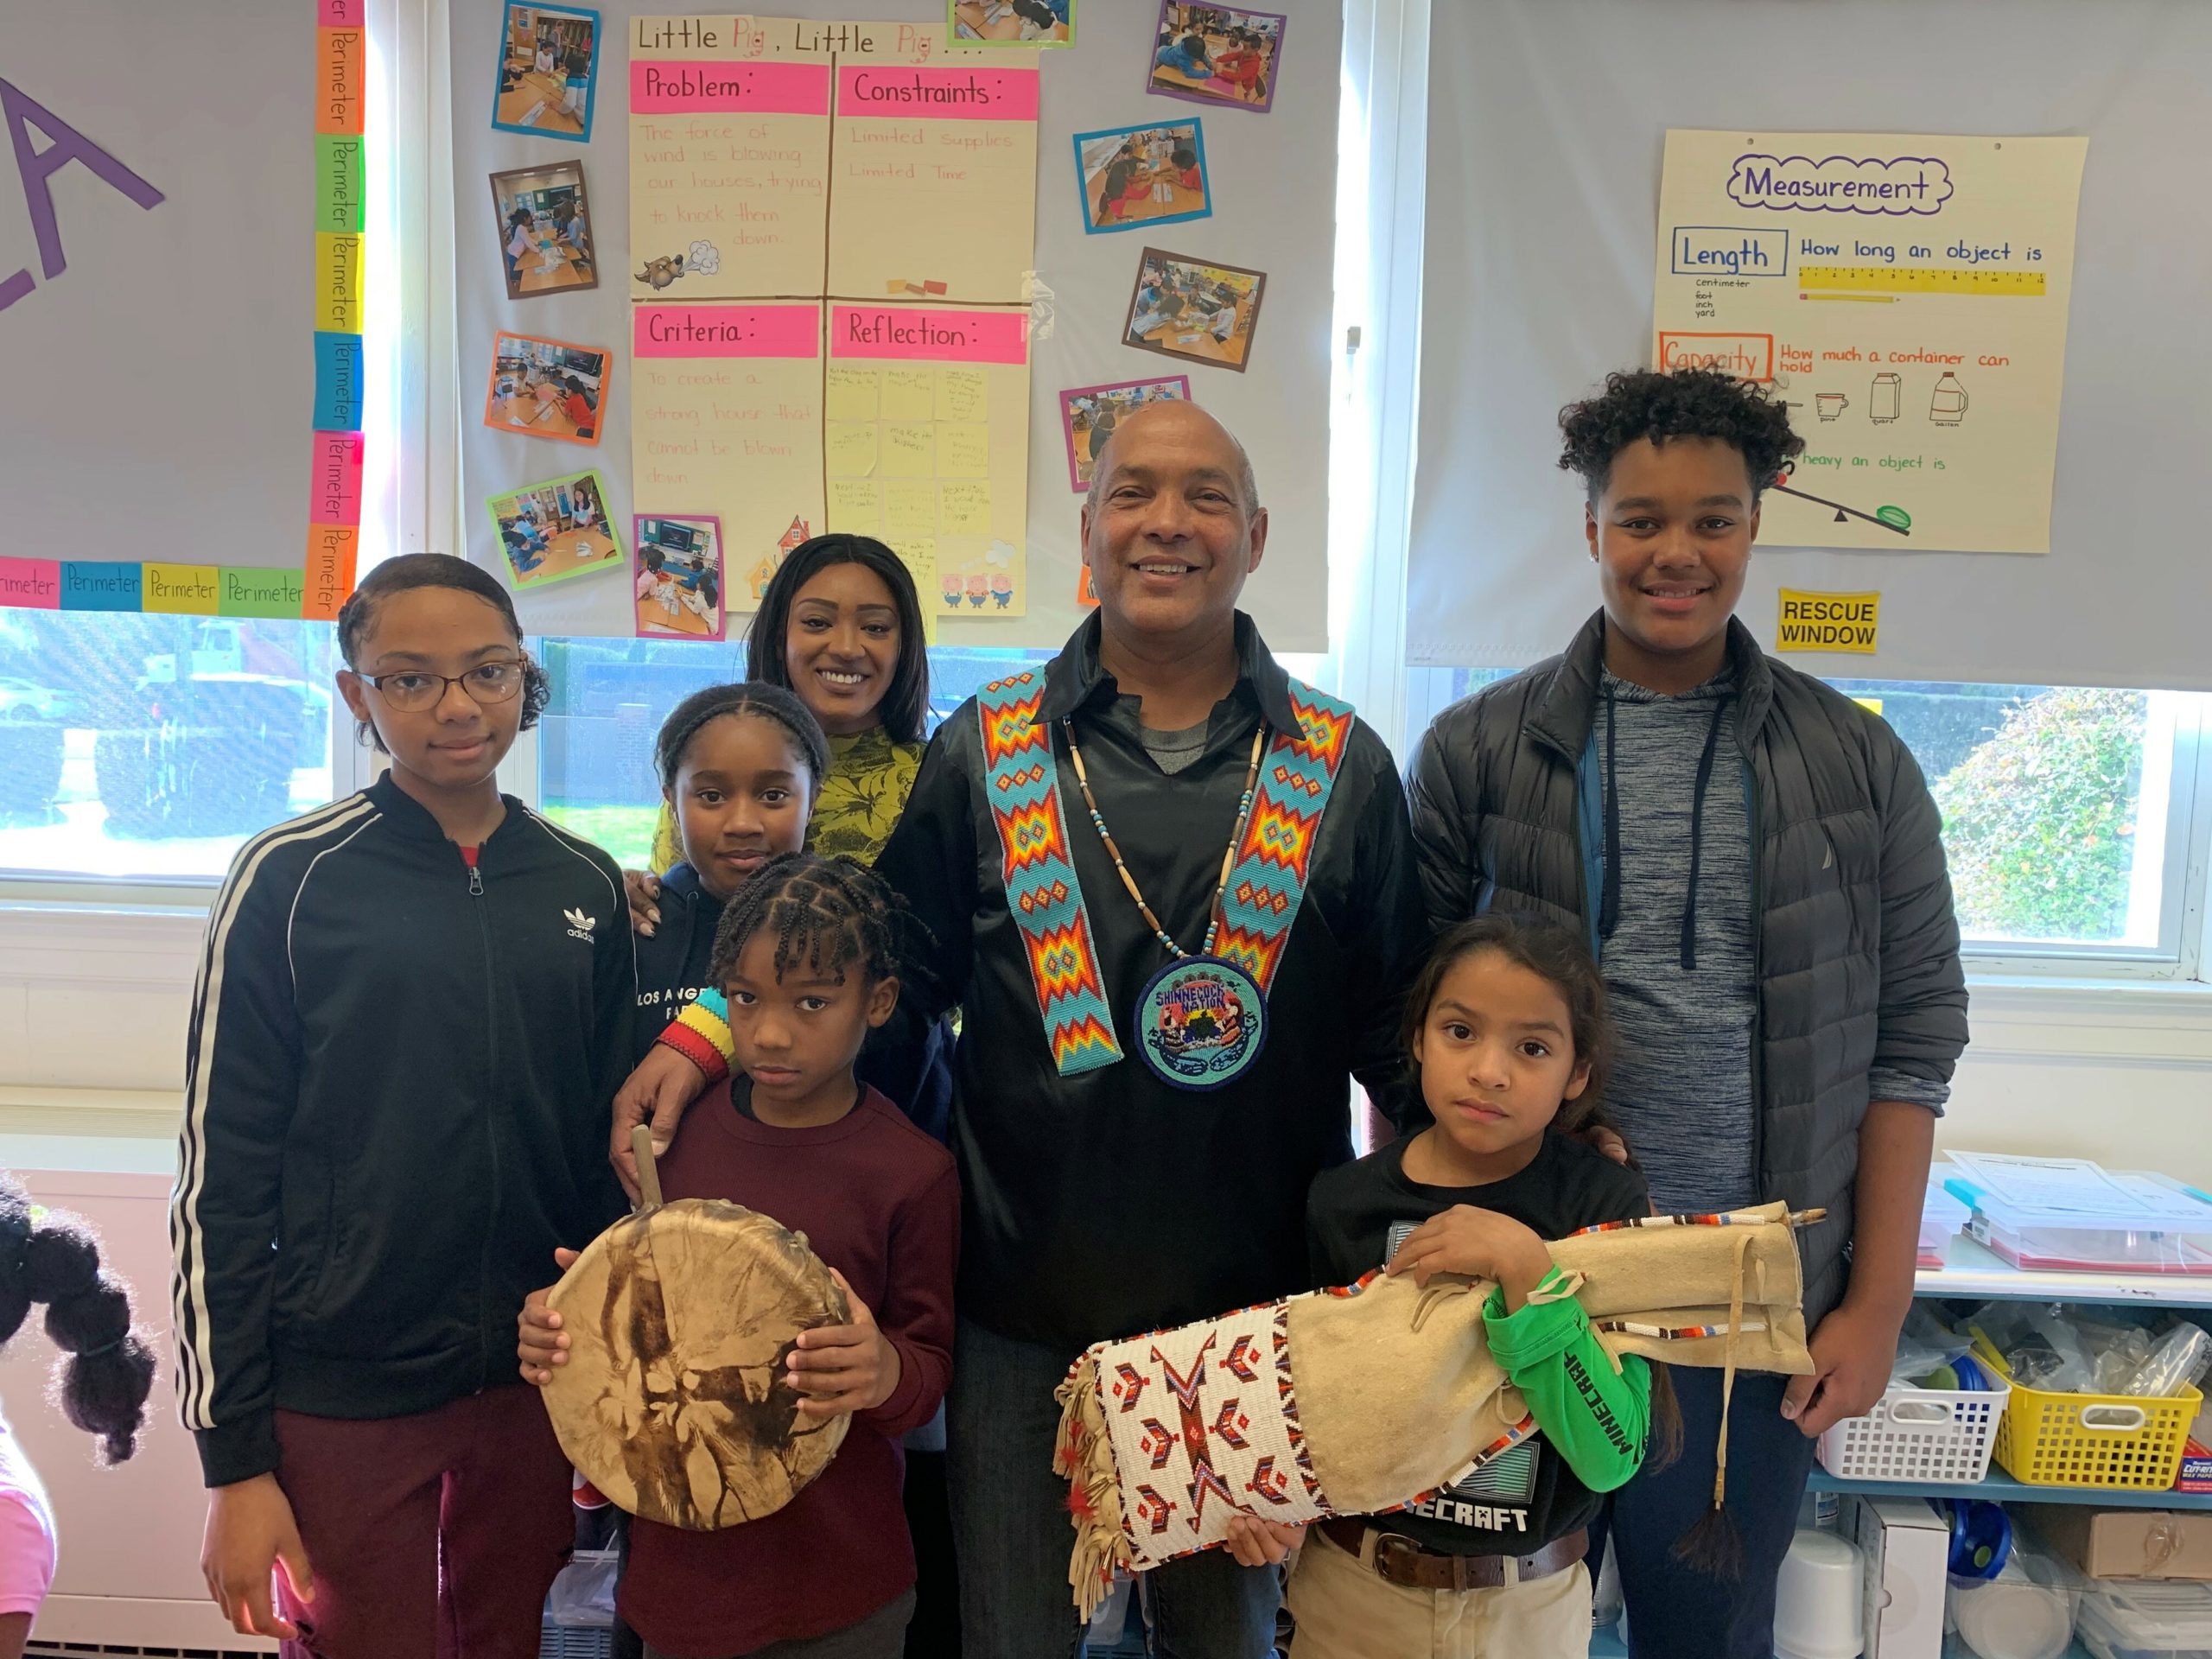 On Thursday, November 21, members of the Shinnecock Nation offered a presentation to third-graders in honor of Native American Heritage month. The presentation included the sharing of Native American folktales, beliefs, traditions, and food. Students sampled homemade fry bread and watched the performance of a Native American song.